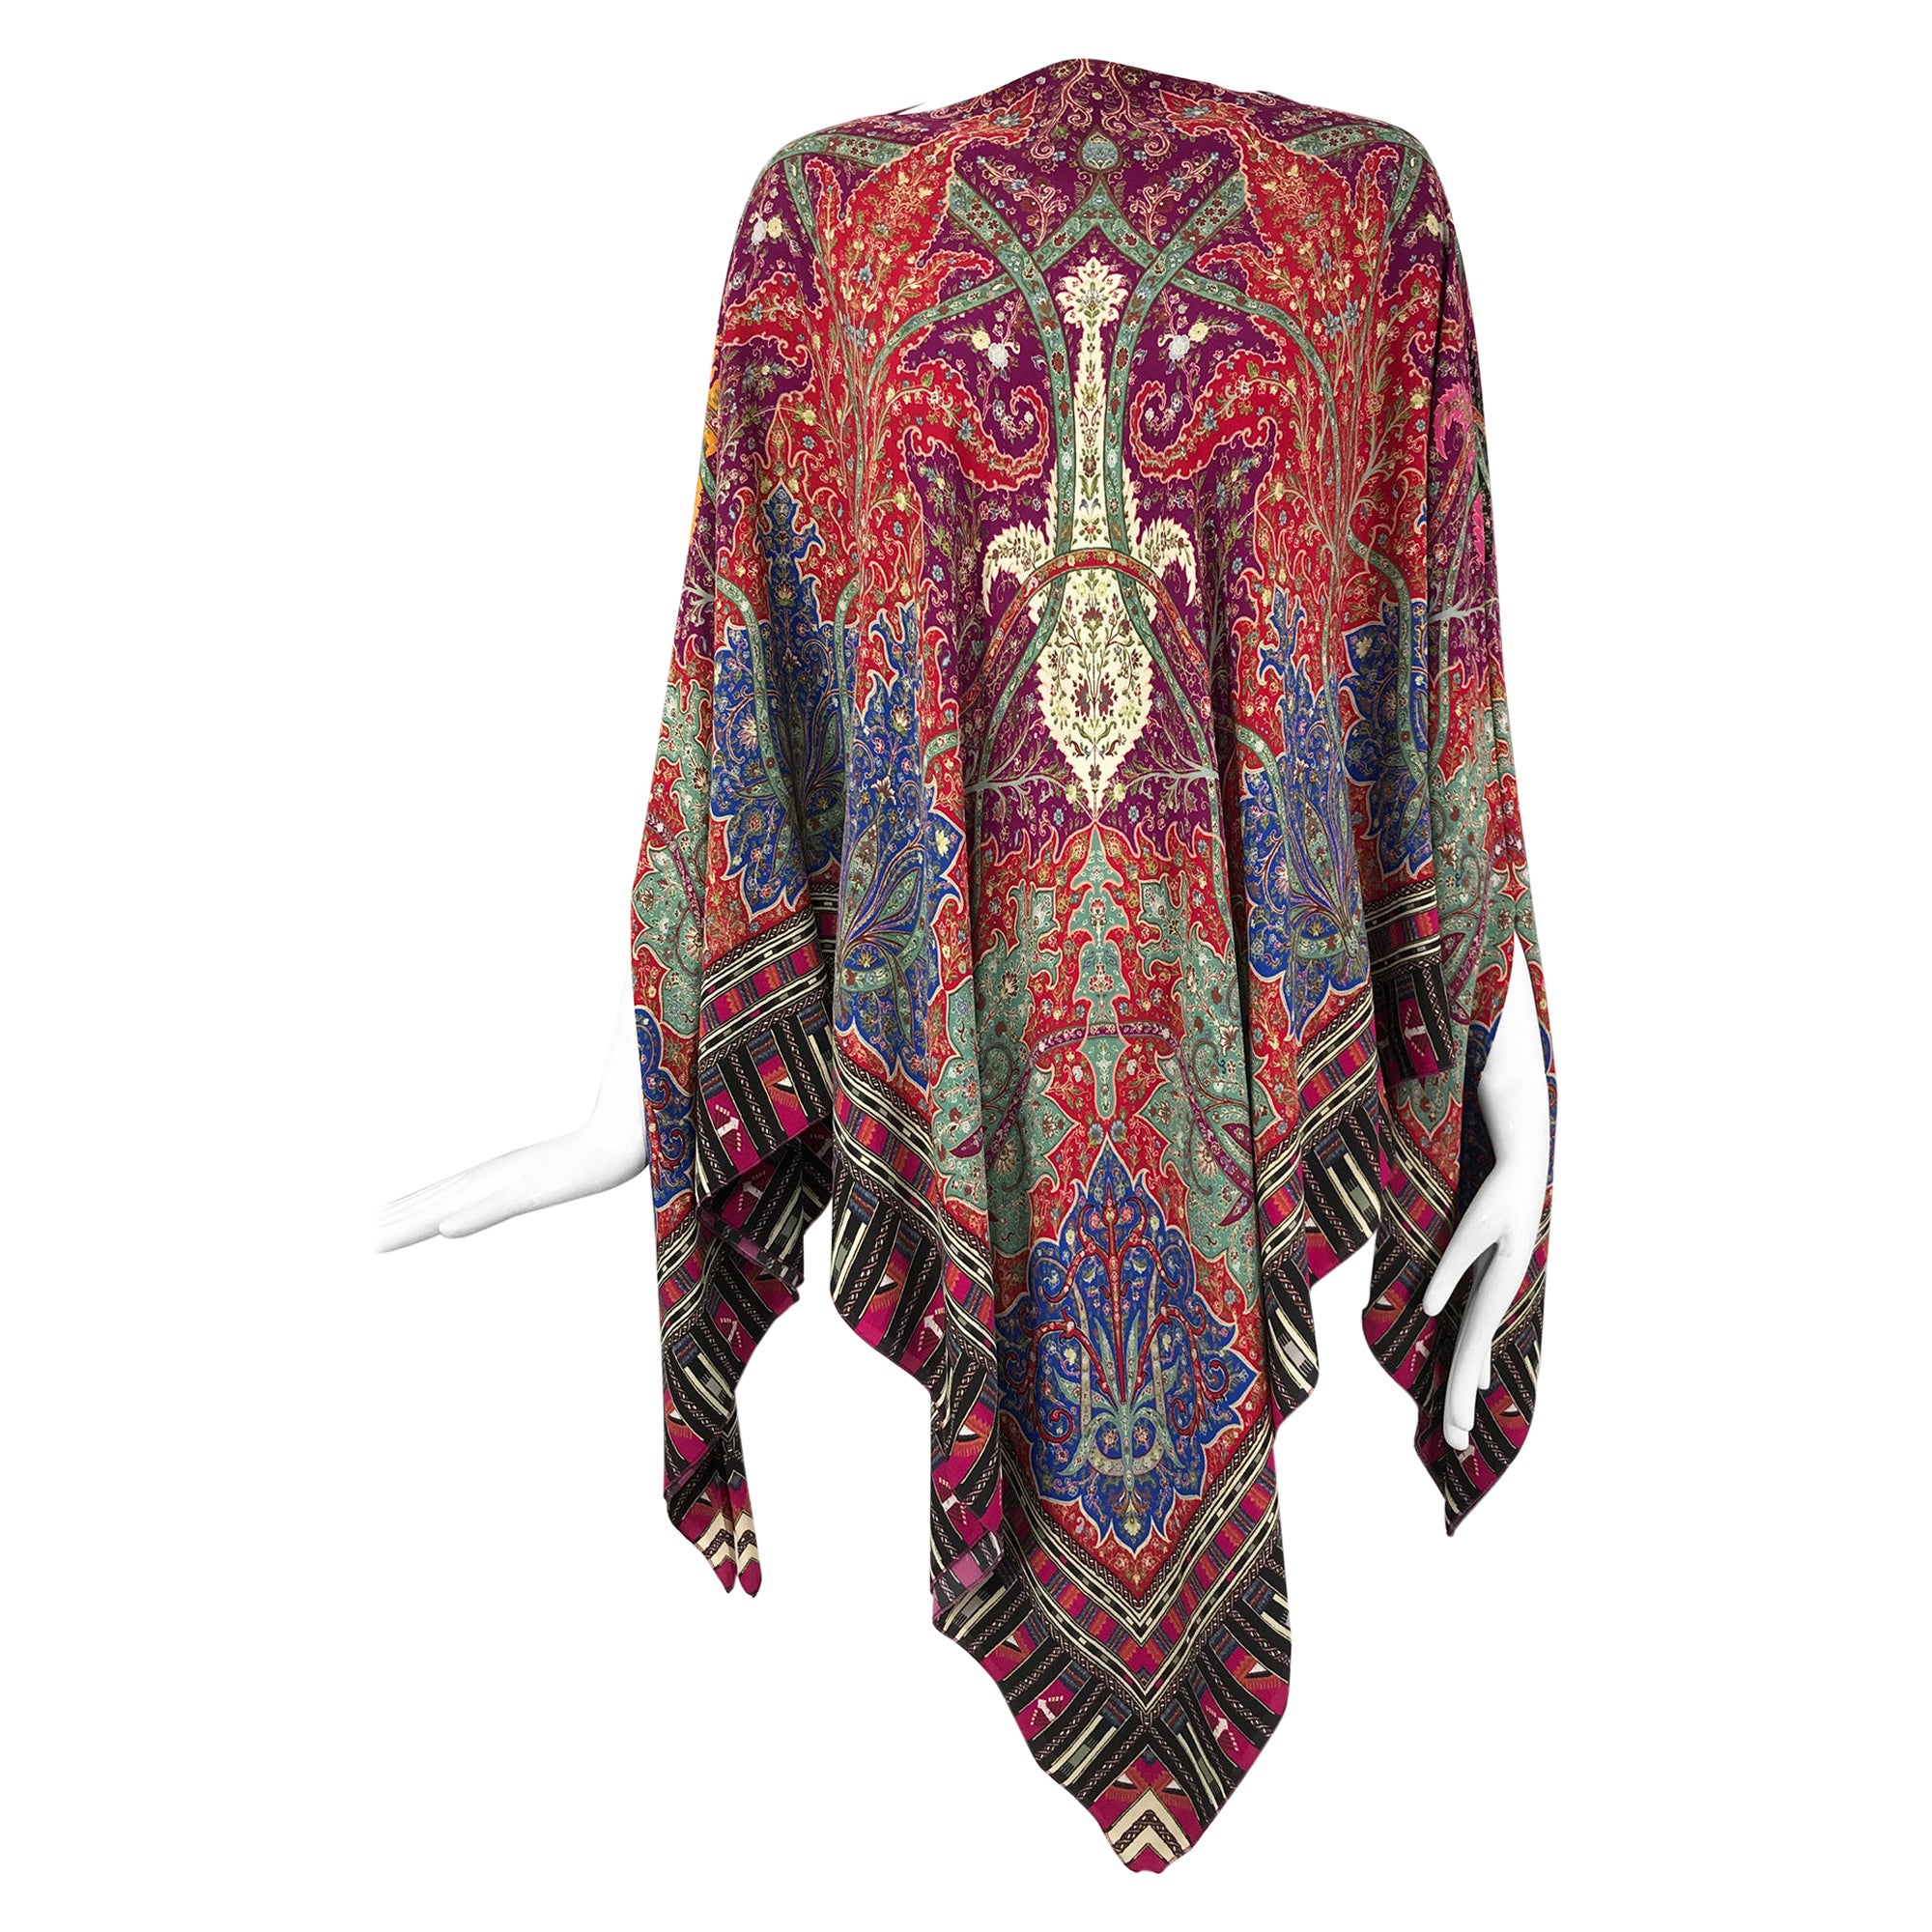 Etro Poncho - 3 For Sale on 1stDibs